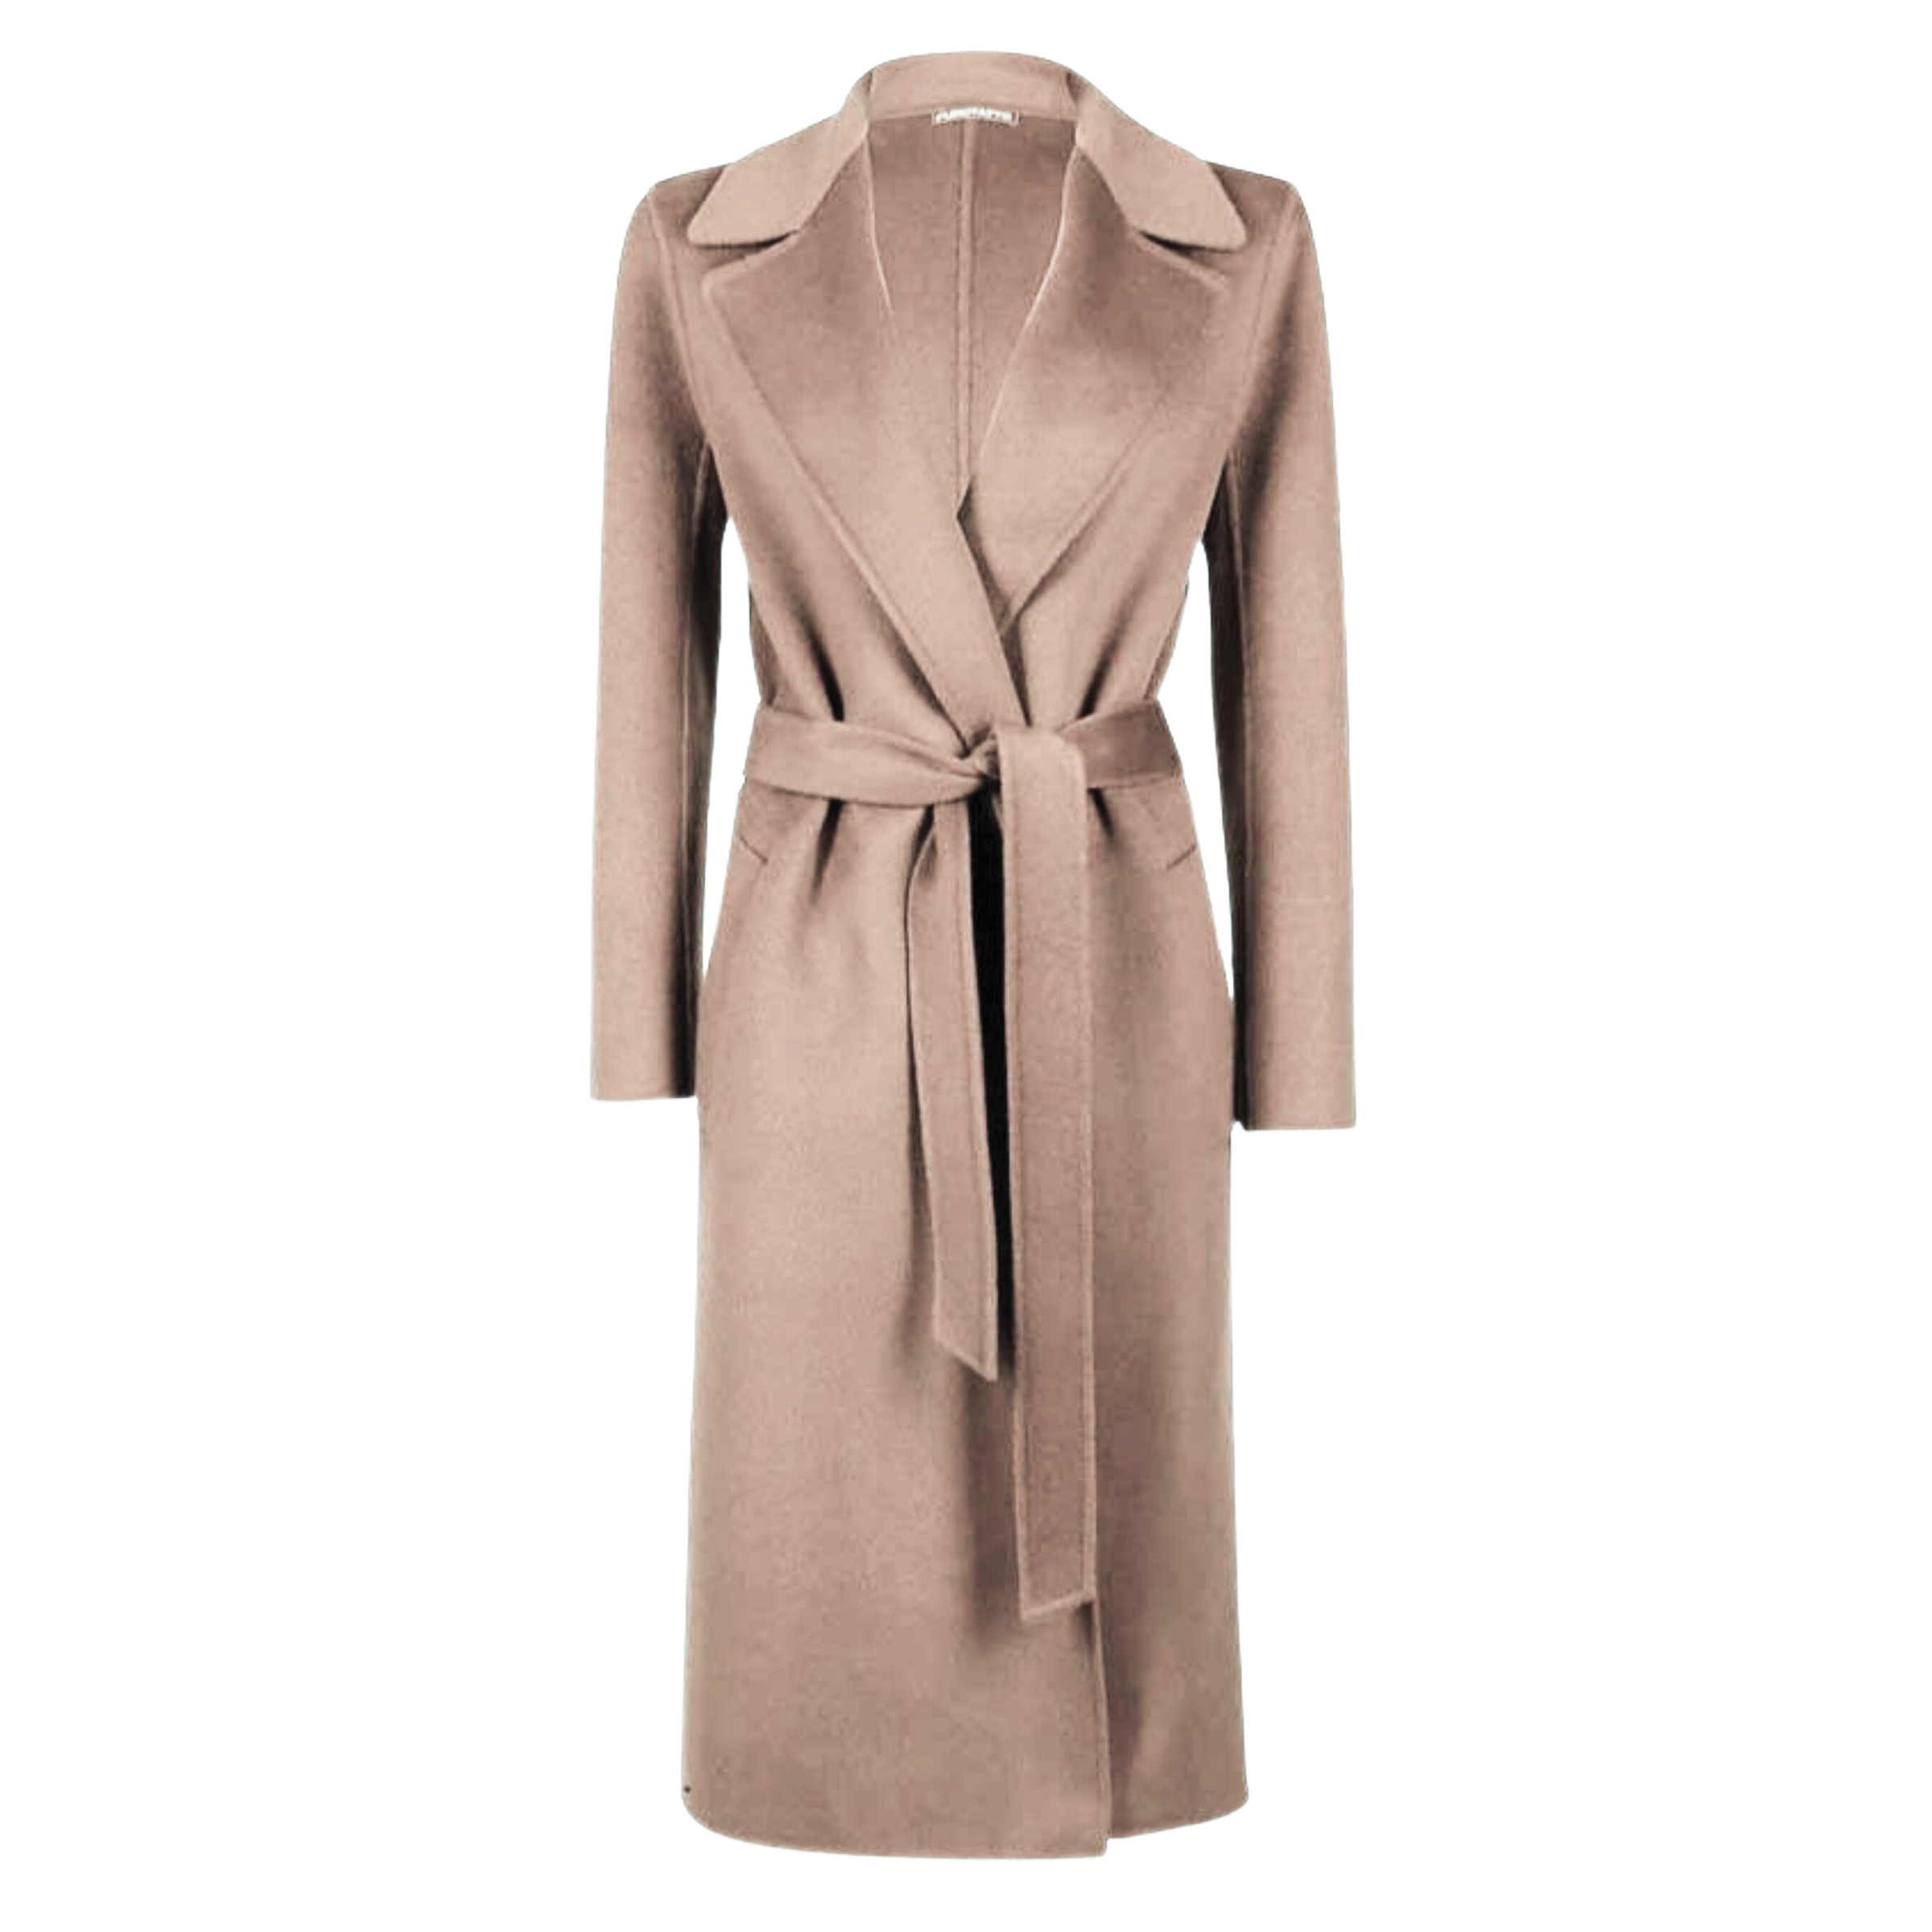 Purotatto Cashmere and Wool Belted Coat Timeless Martha's Vineyard